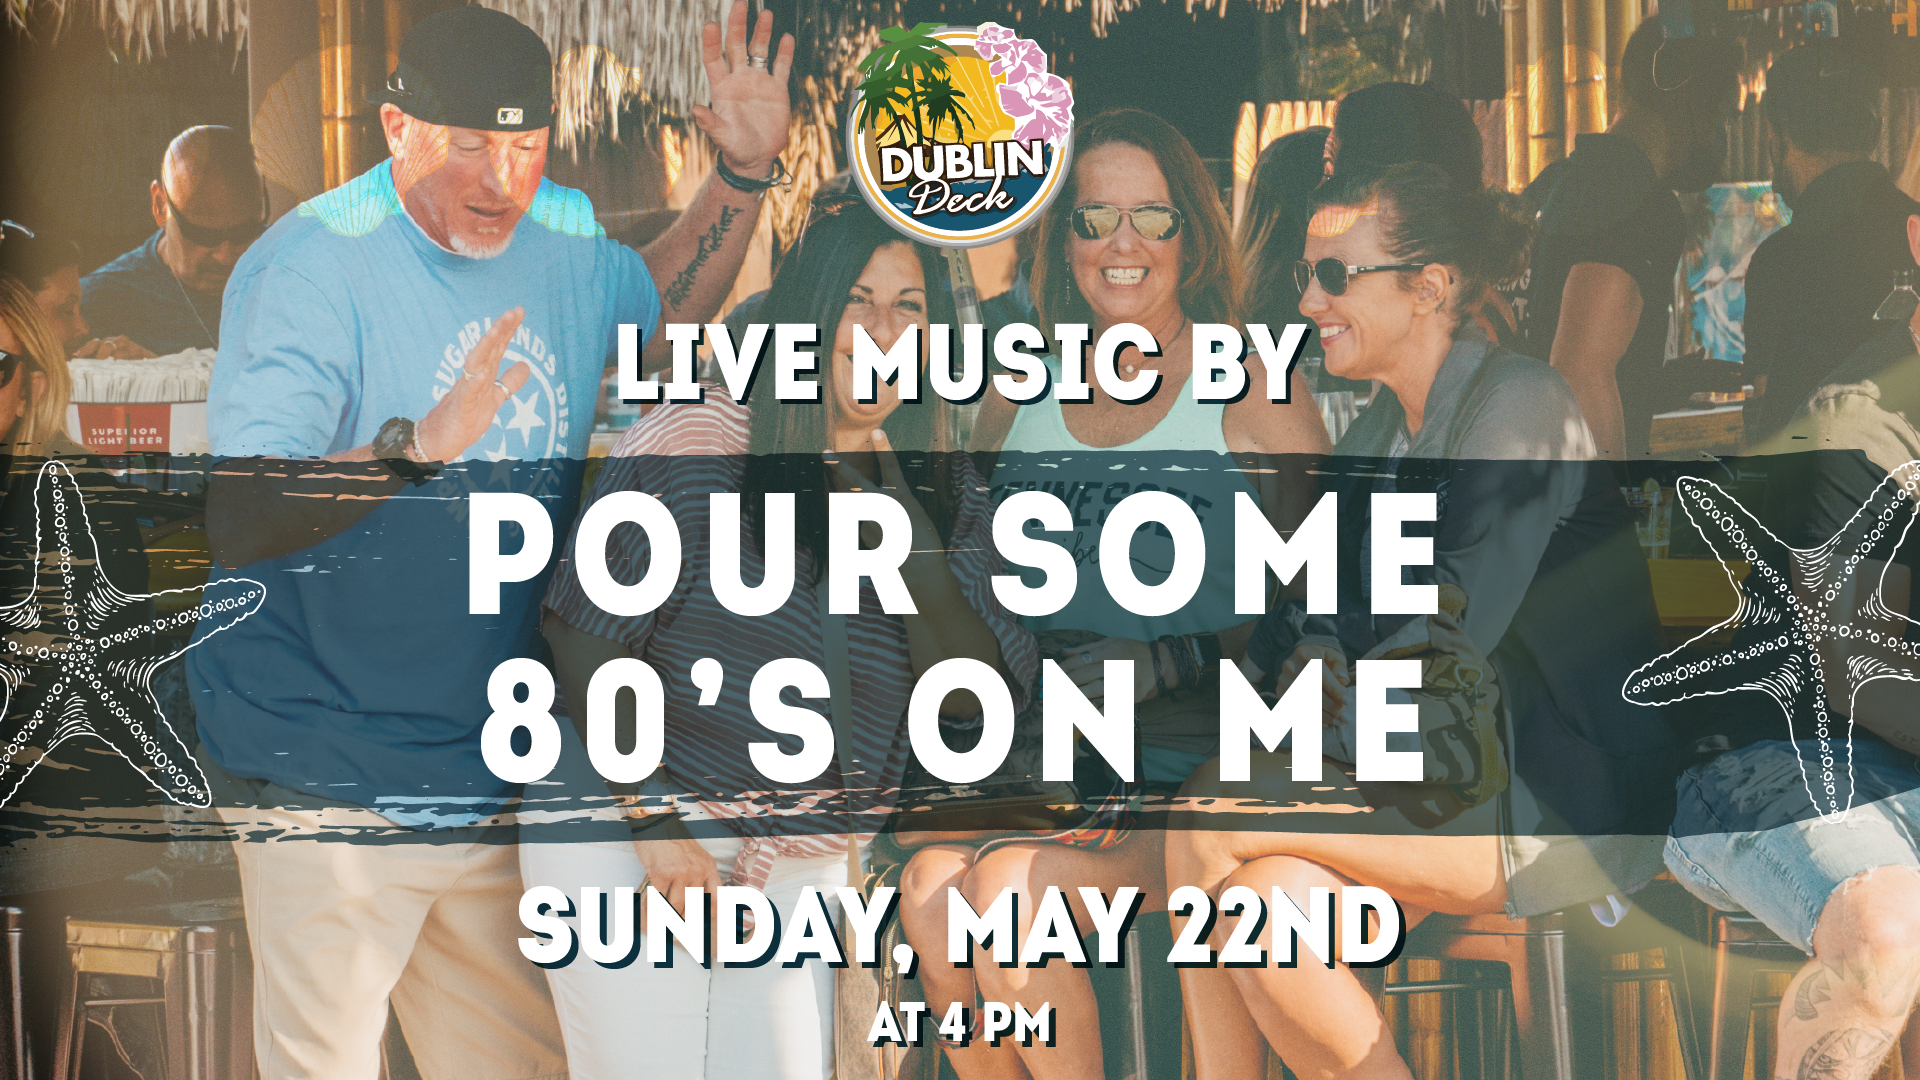 End your weekend off with Pour Some 80's On Me! Music begins at 4PM